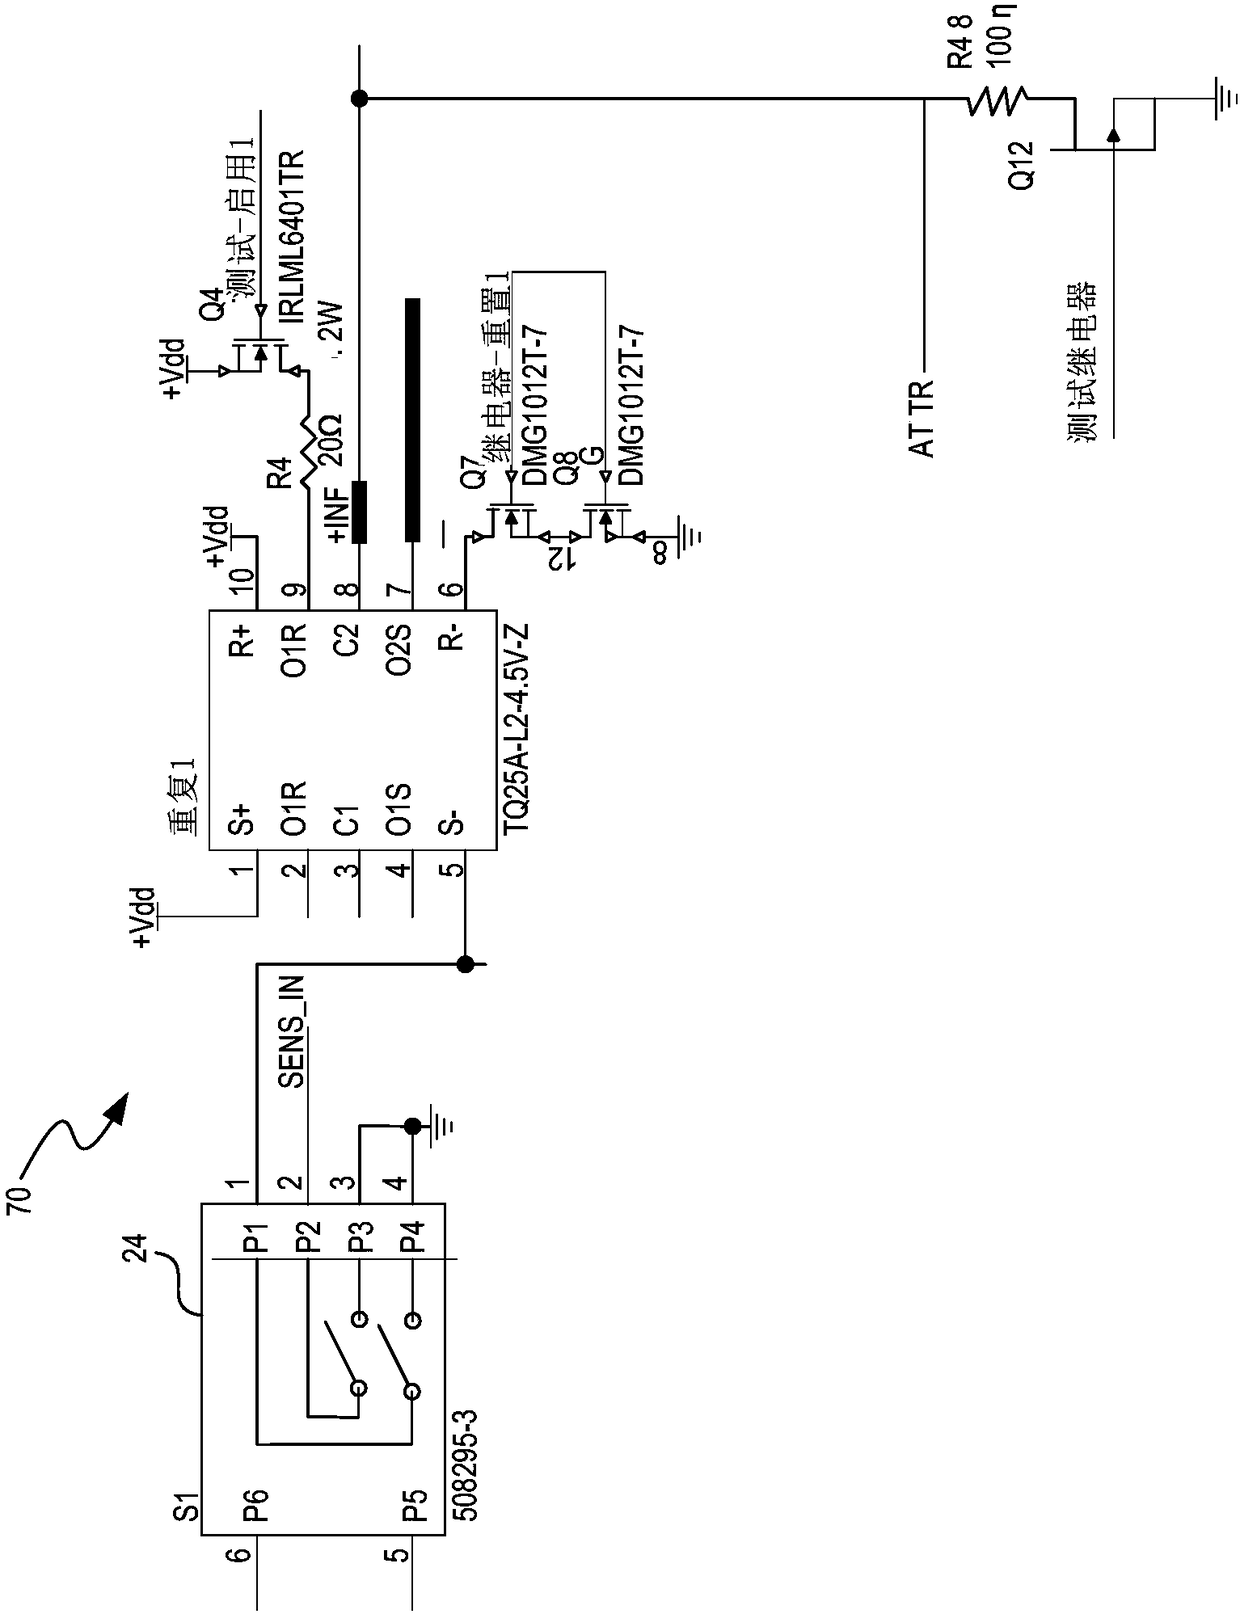 Electronic module assembly for controlling aircraft restraint systems